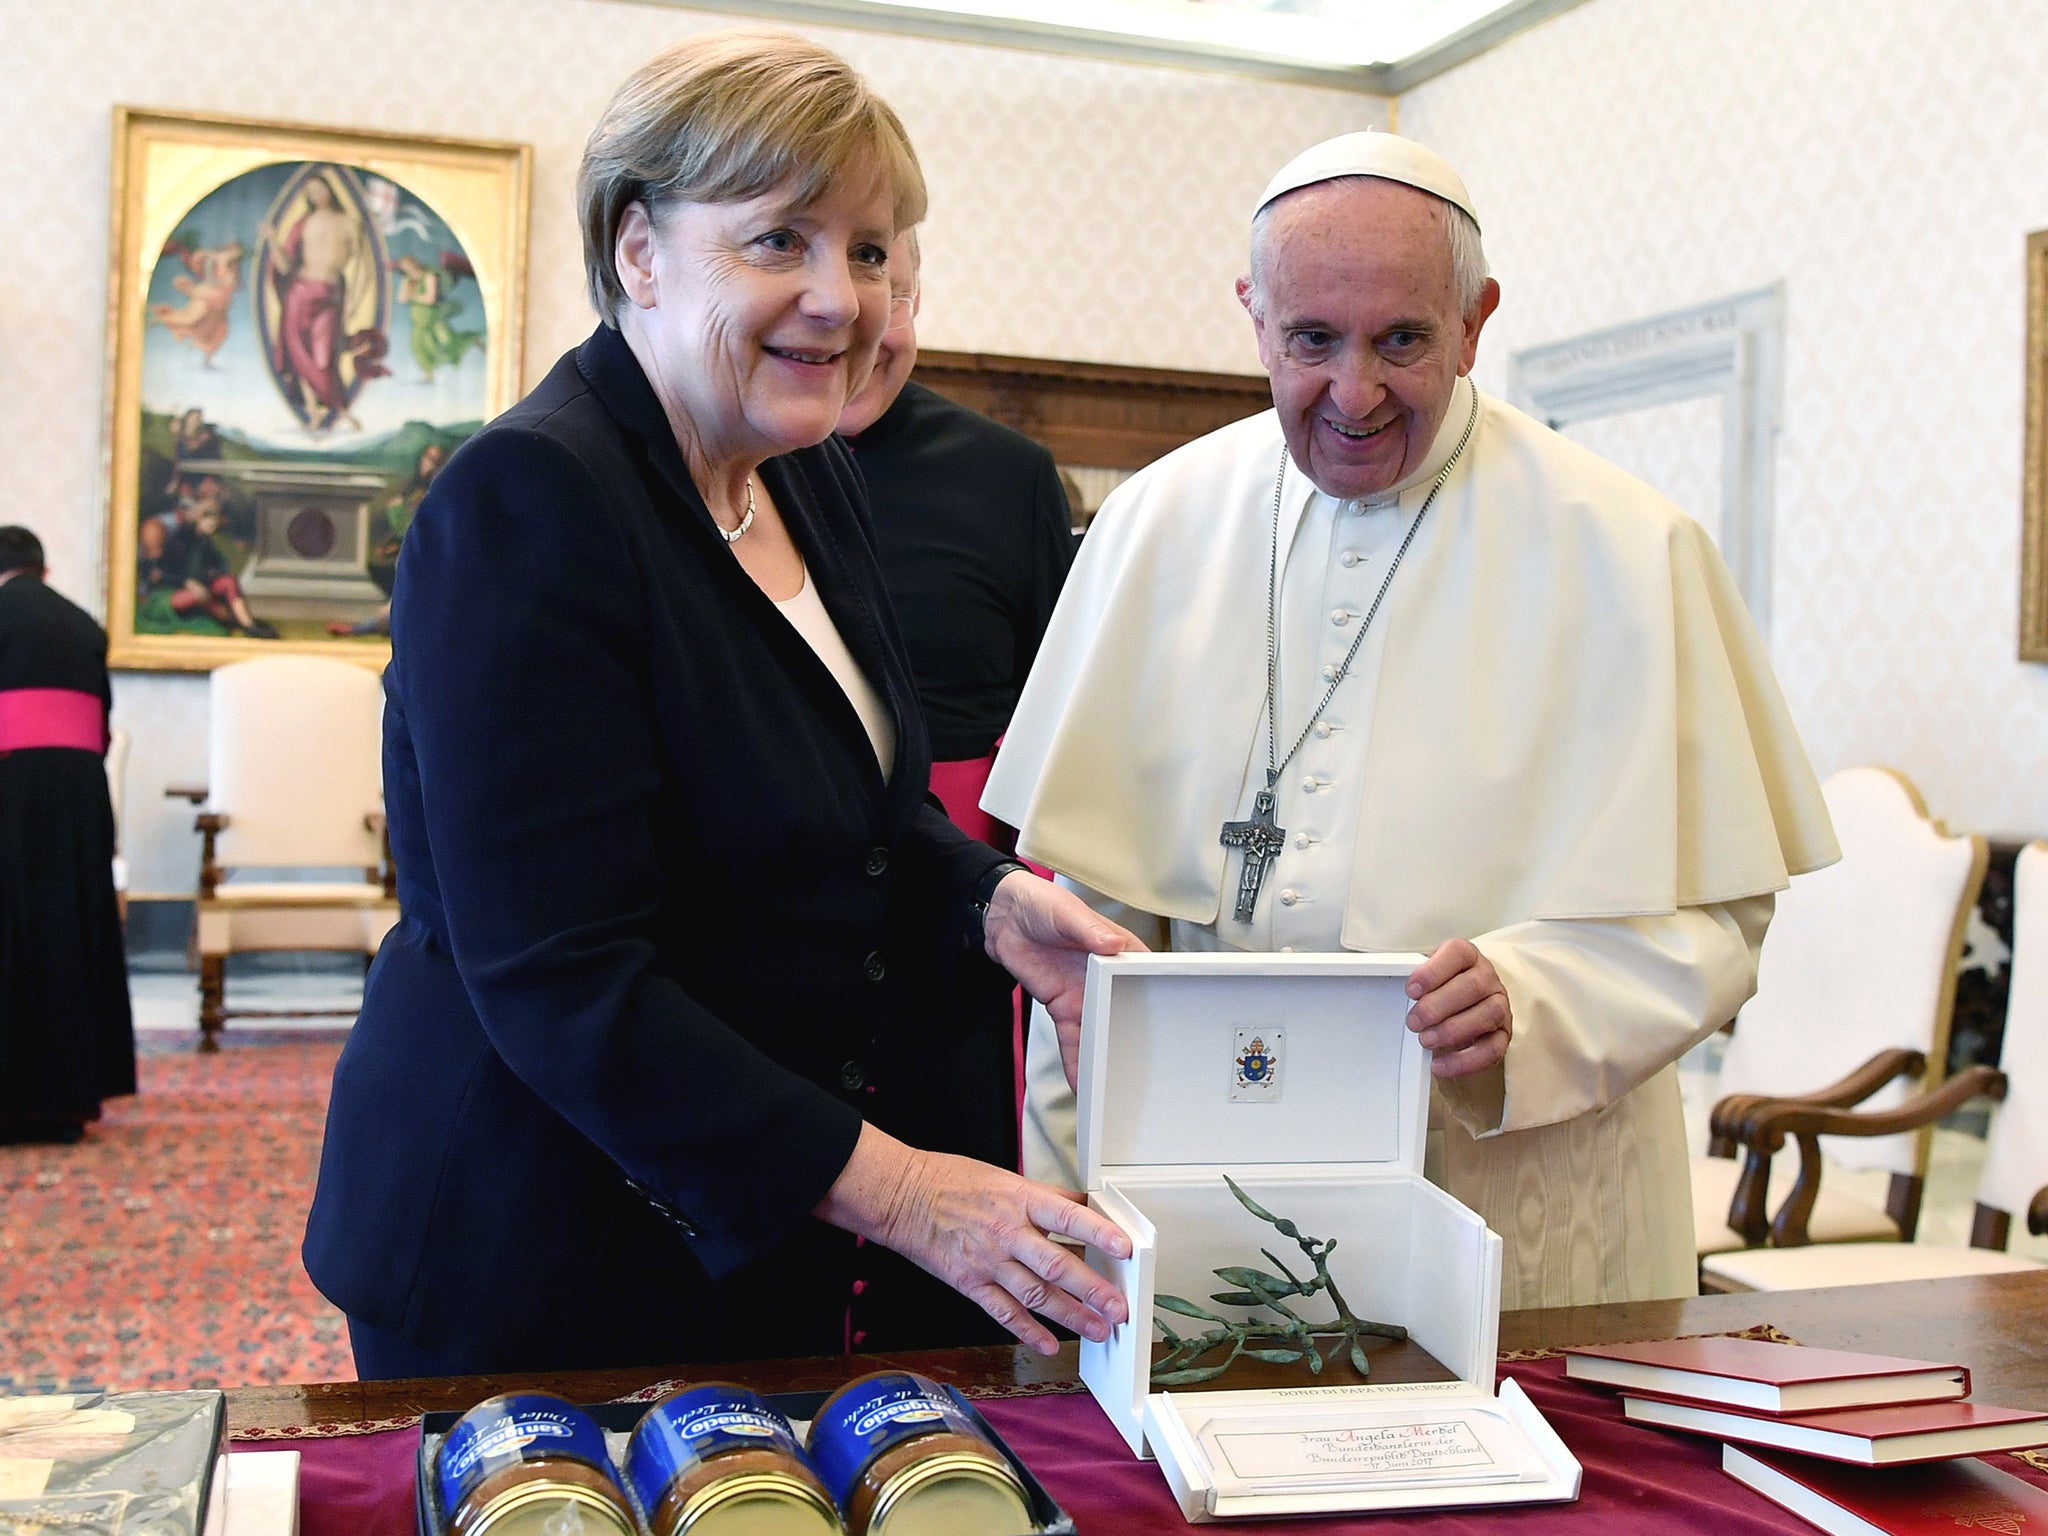 German Chancellor Angela Merkel exchanges gifts with Pope Francis during a meeting at the Vatican